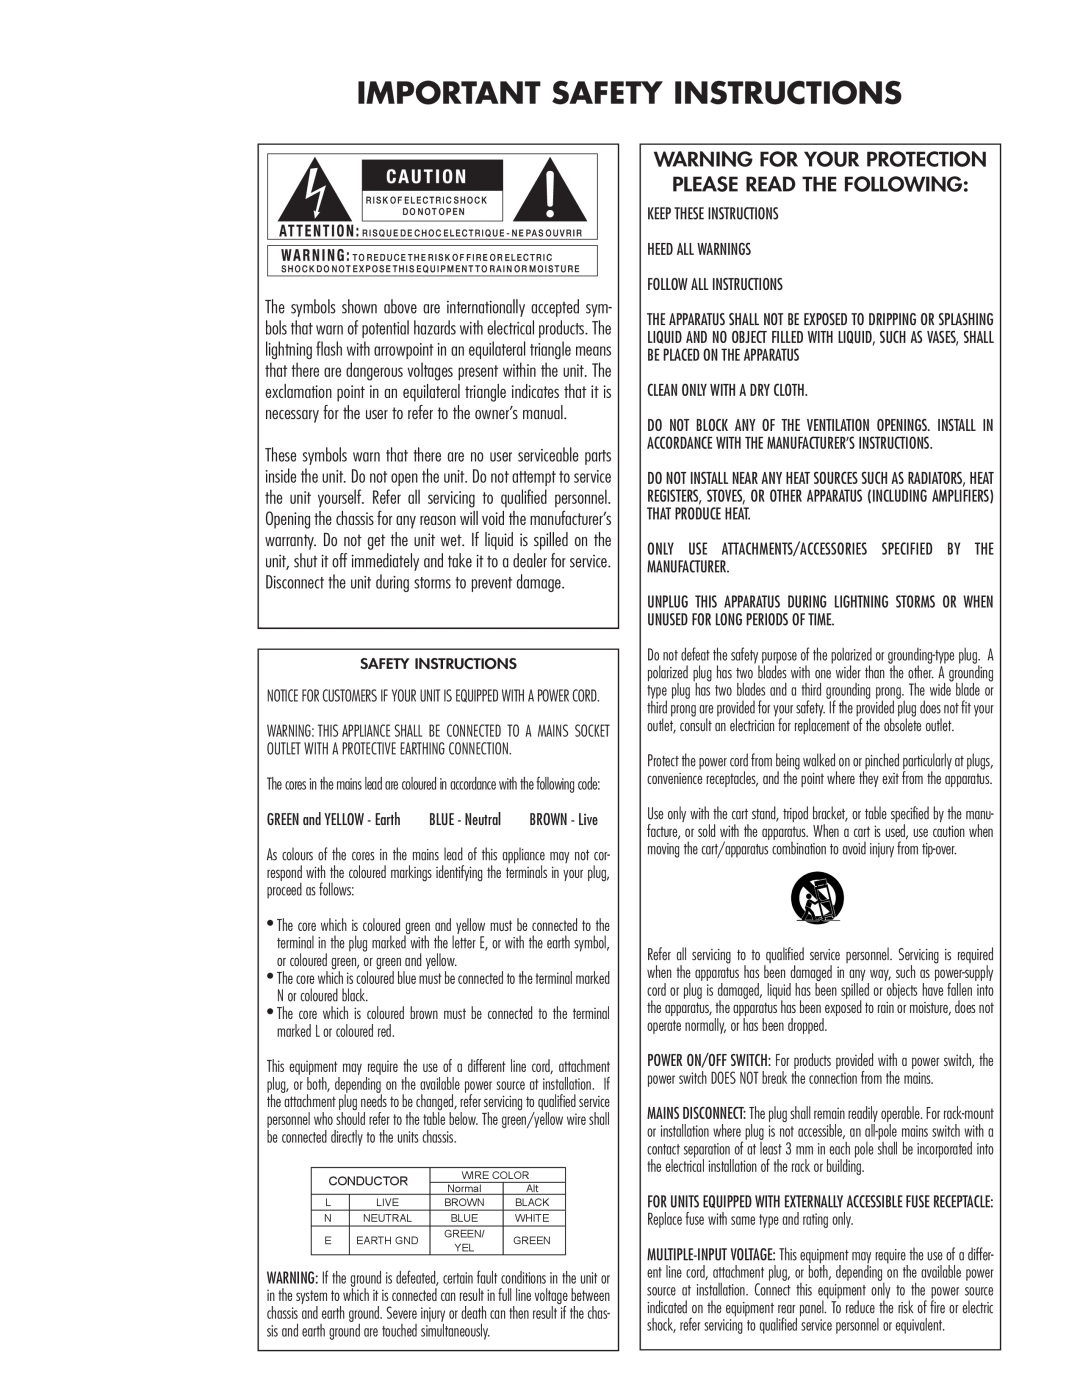 DigiTech GSP1101 owner manual Important Safety Instructions, Warning For Your Protection, Please Read The Following 